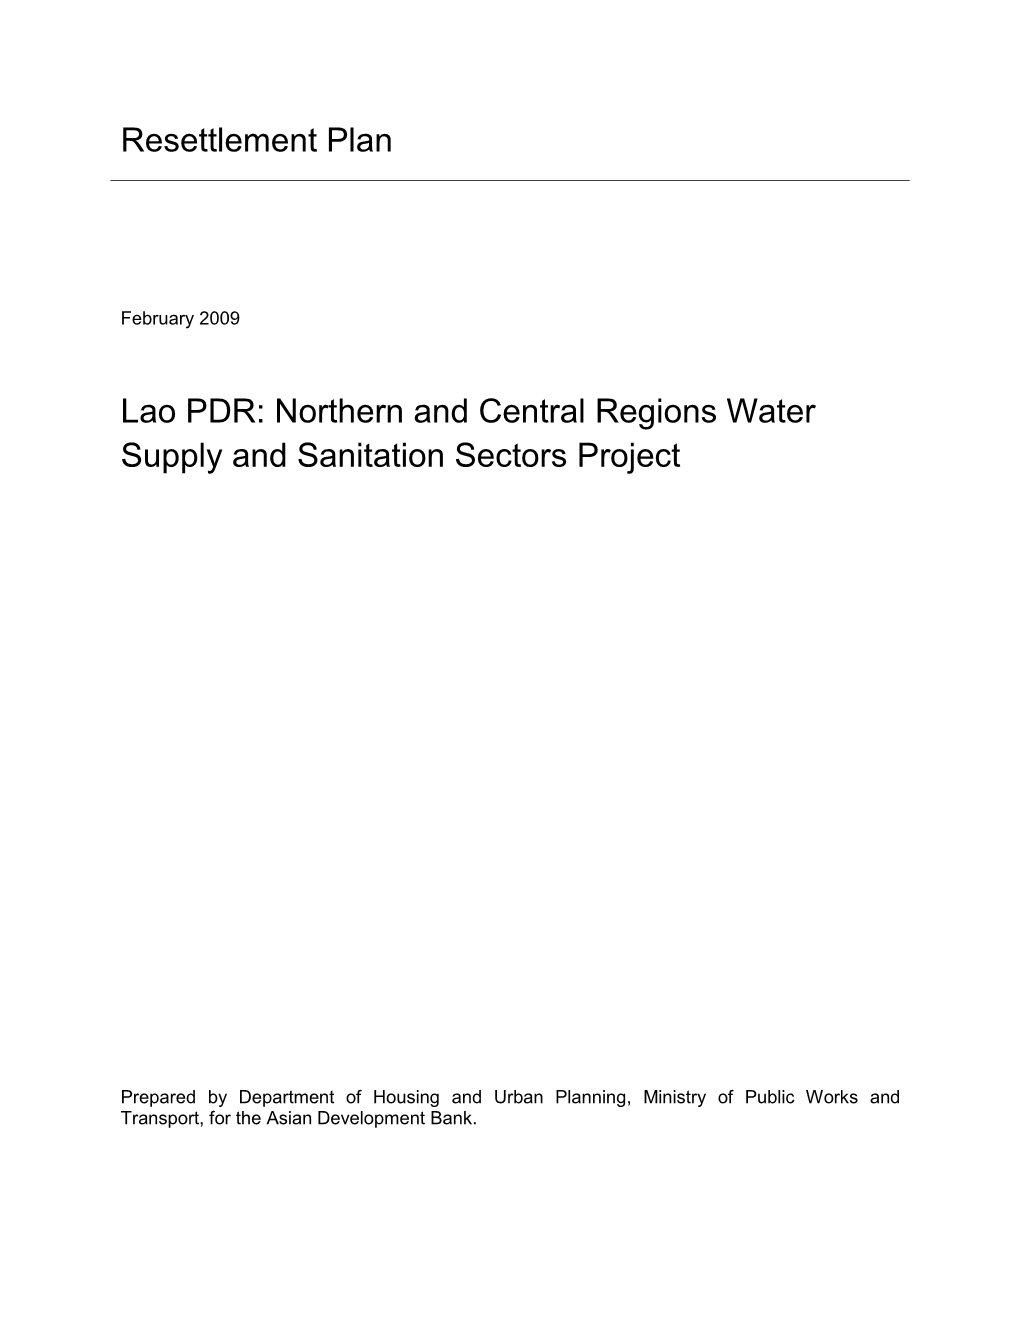 Northern and Central Regions Water Supply and Sanitation Sectors Project